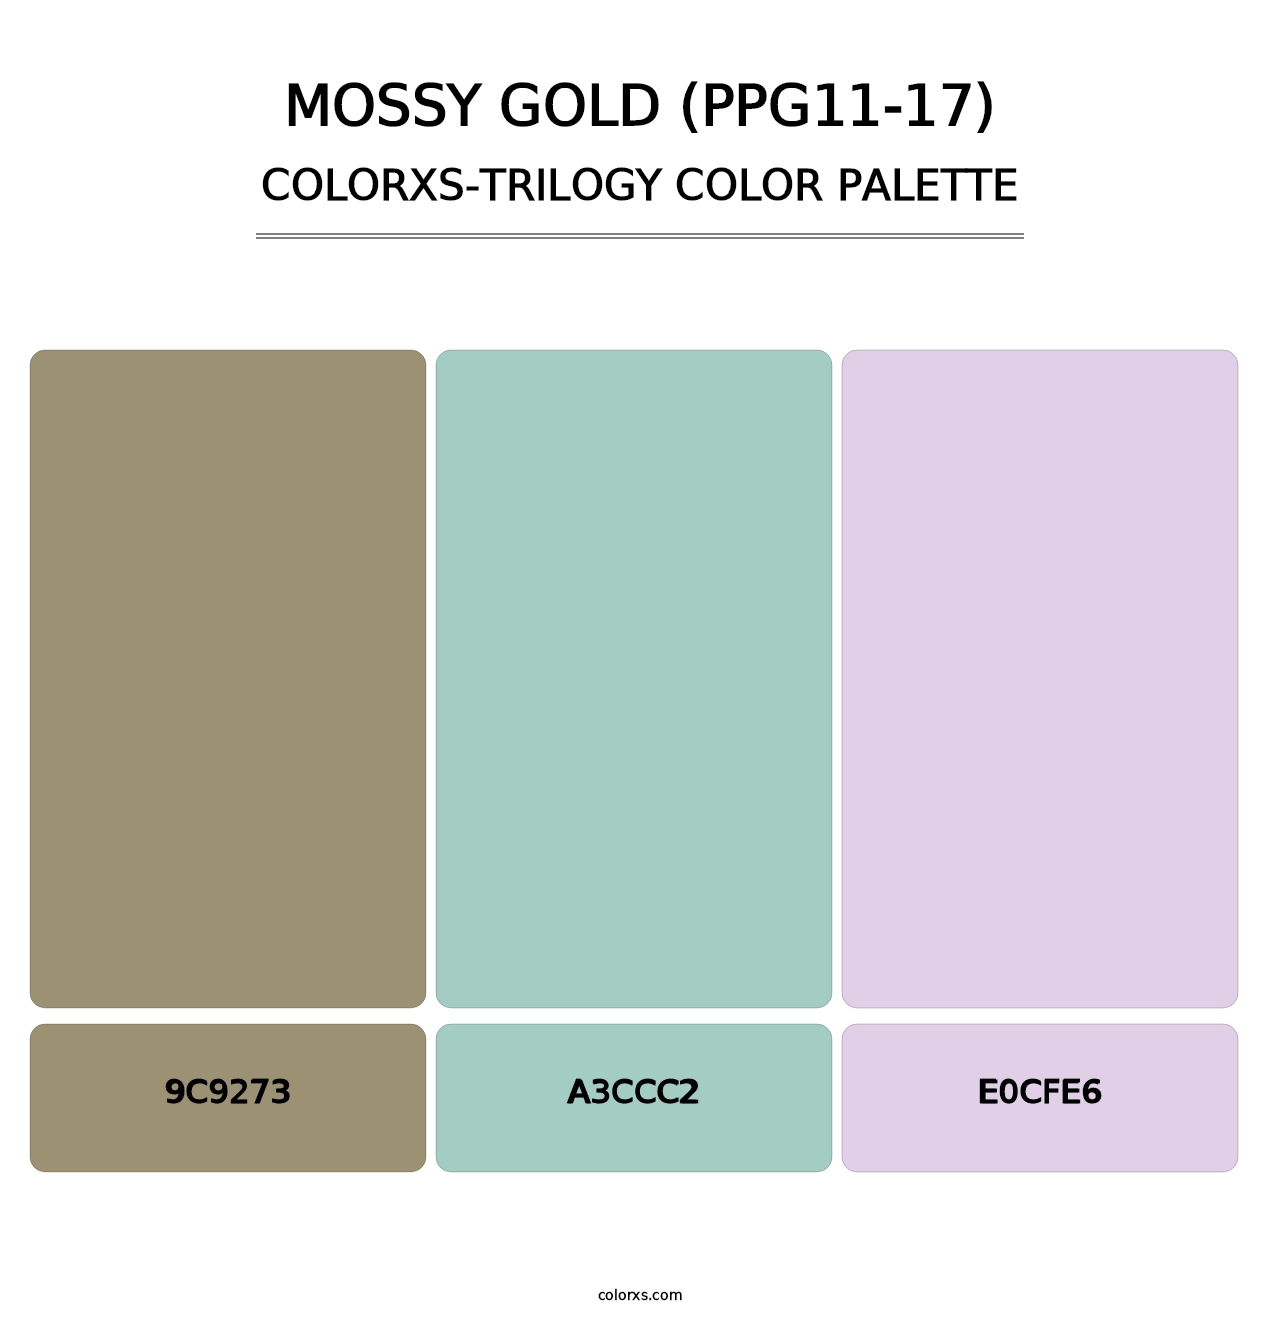 Mossy Gold (PPG11-17) - Colorxs Trilogy Palette